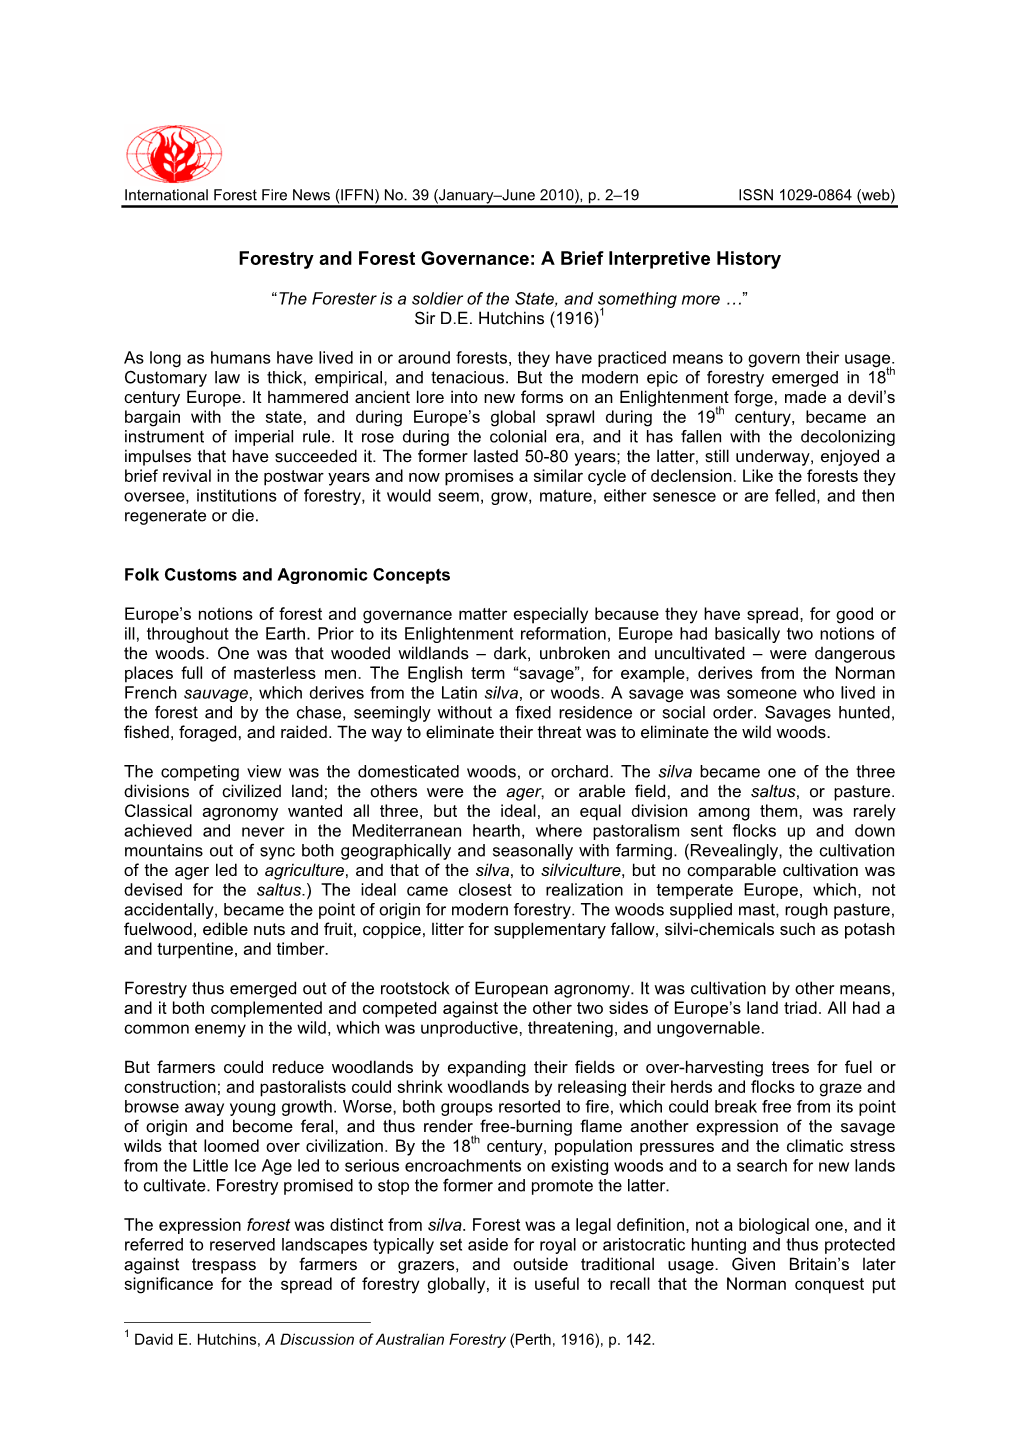 Forestry and Forest Governance: a Brief Interpretive History